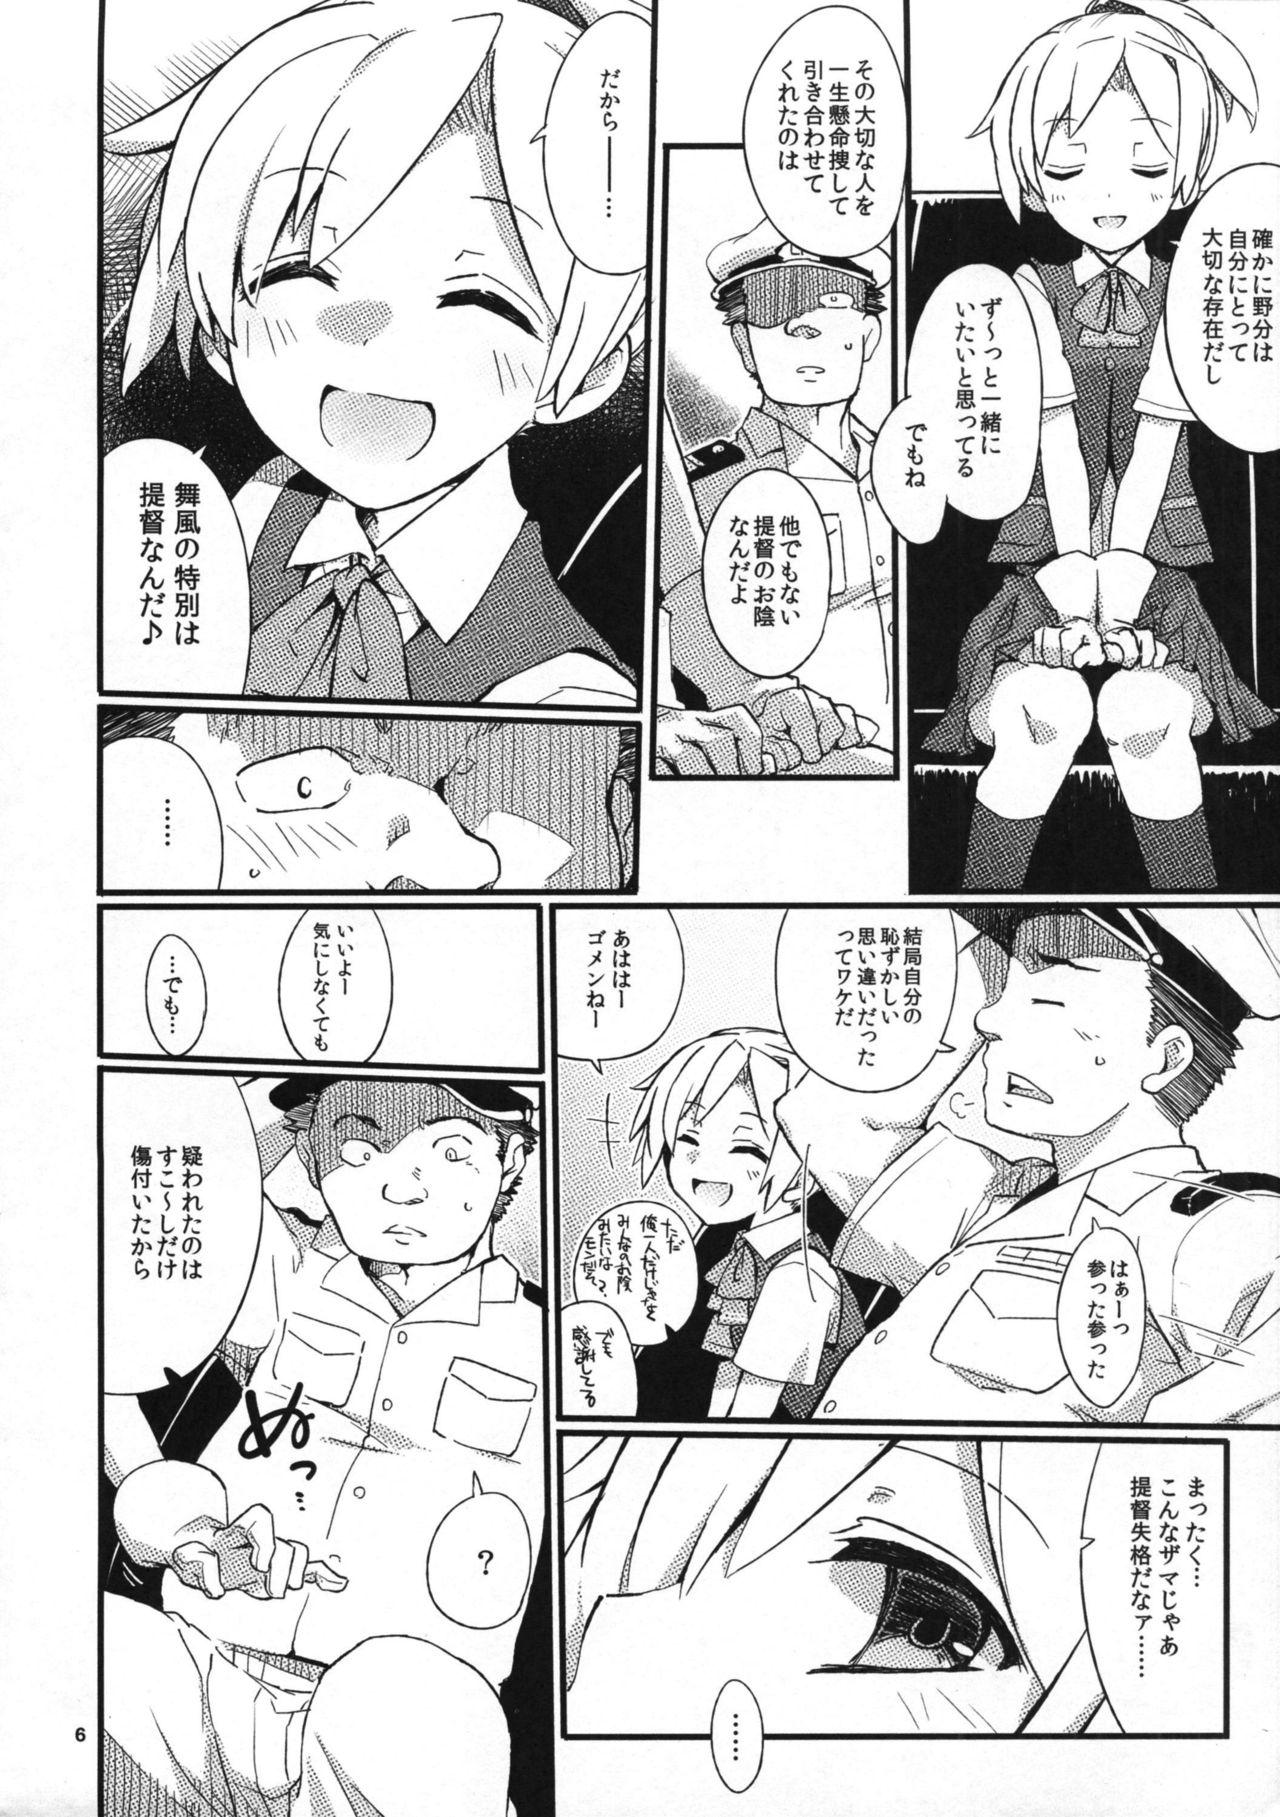 Licking Pussy D3!!! - Kantai collection Spy Camera - Page 5